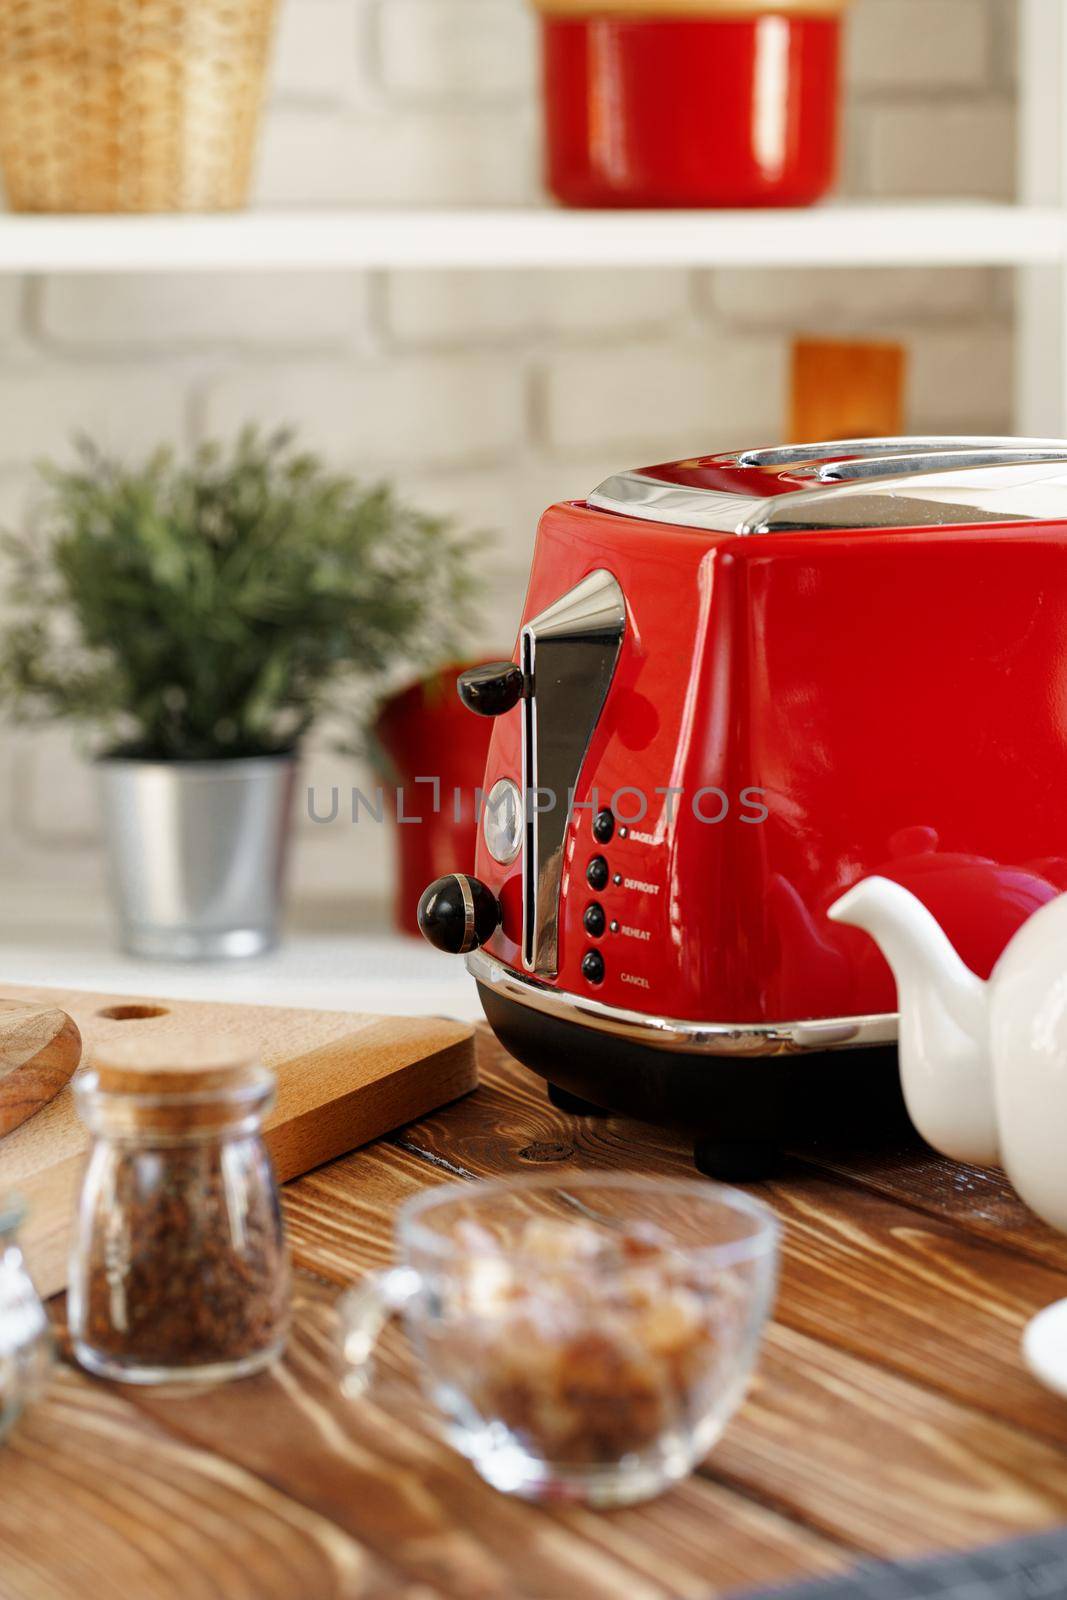 Ceramic teapot and toaster, kitchen table counter close up